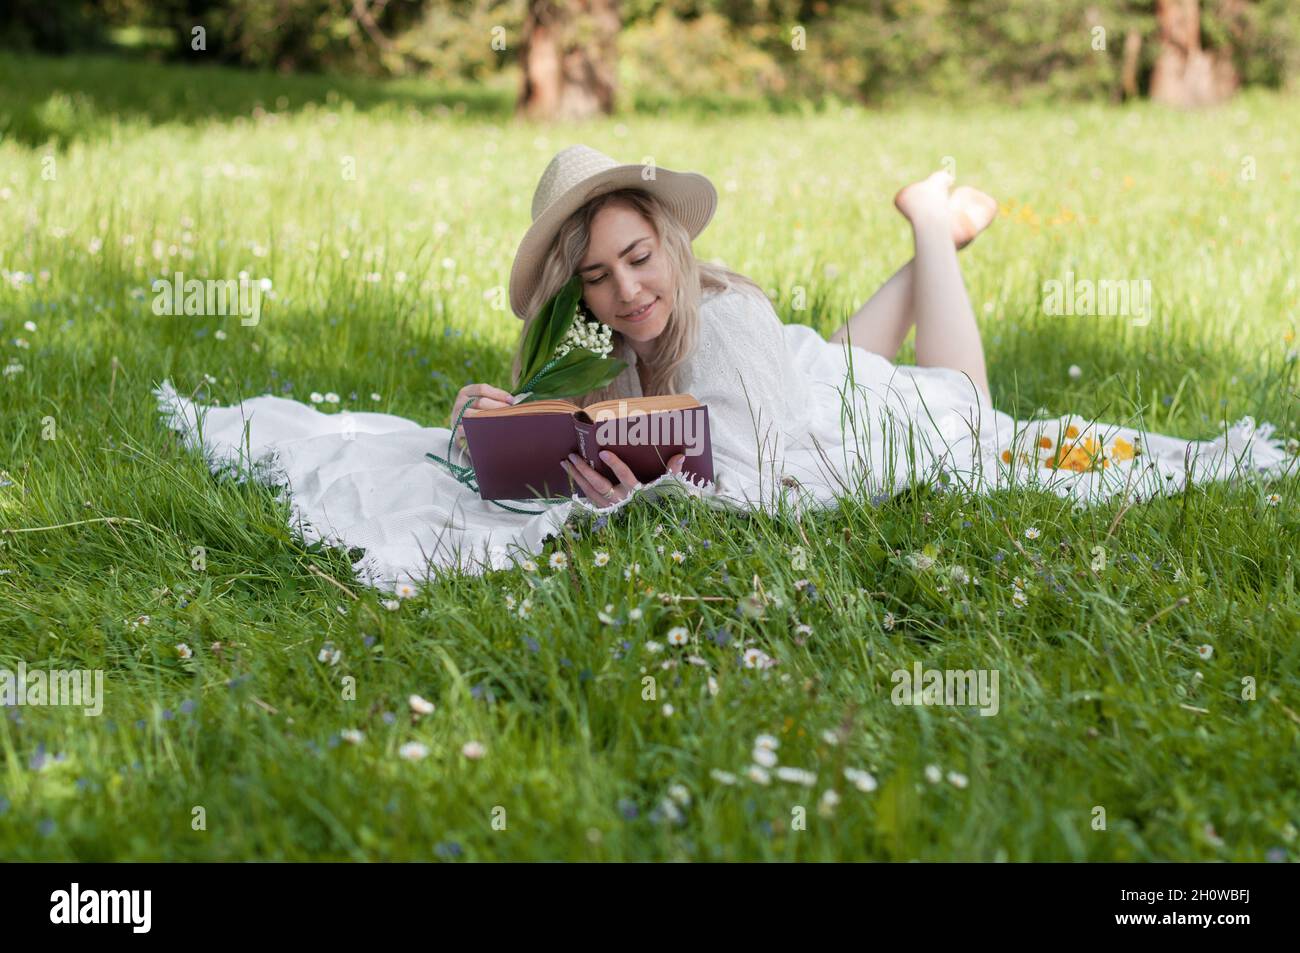 Girl in a hat with a book, lying on a blanket. Stock Photo